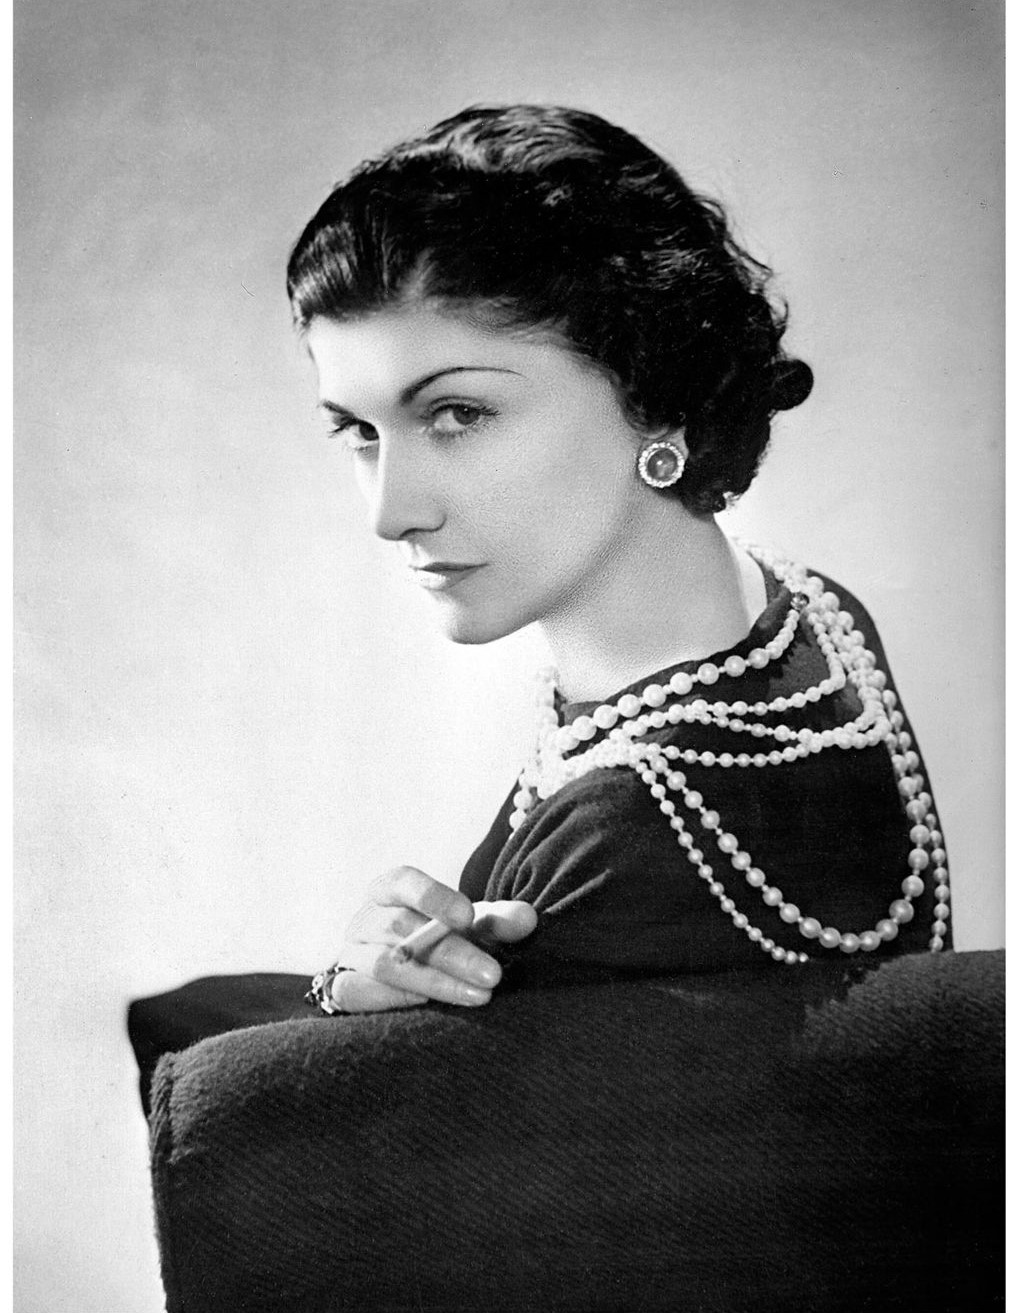 Style icon Coco Chanel - her legacy, style characteristics, iconic designs,  influence and style | Coco chanel fashion, Coco chanel dresses, Fashion